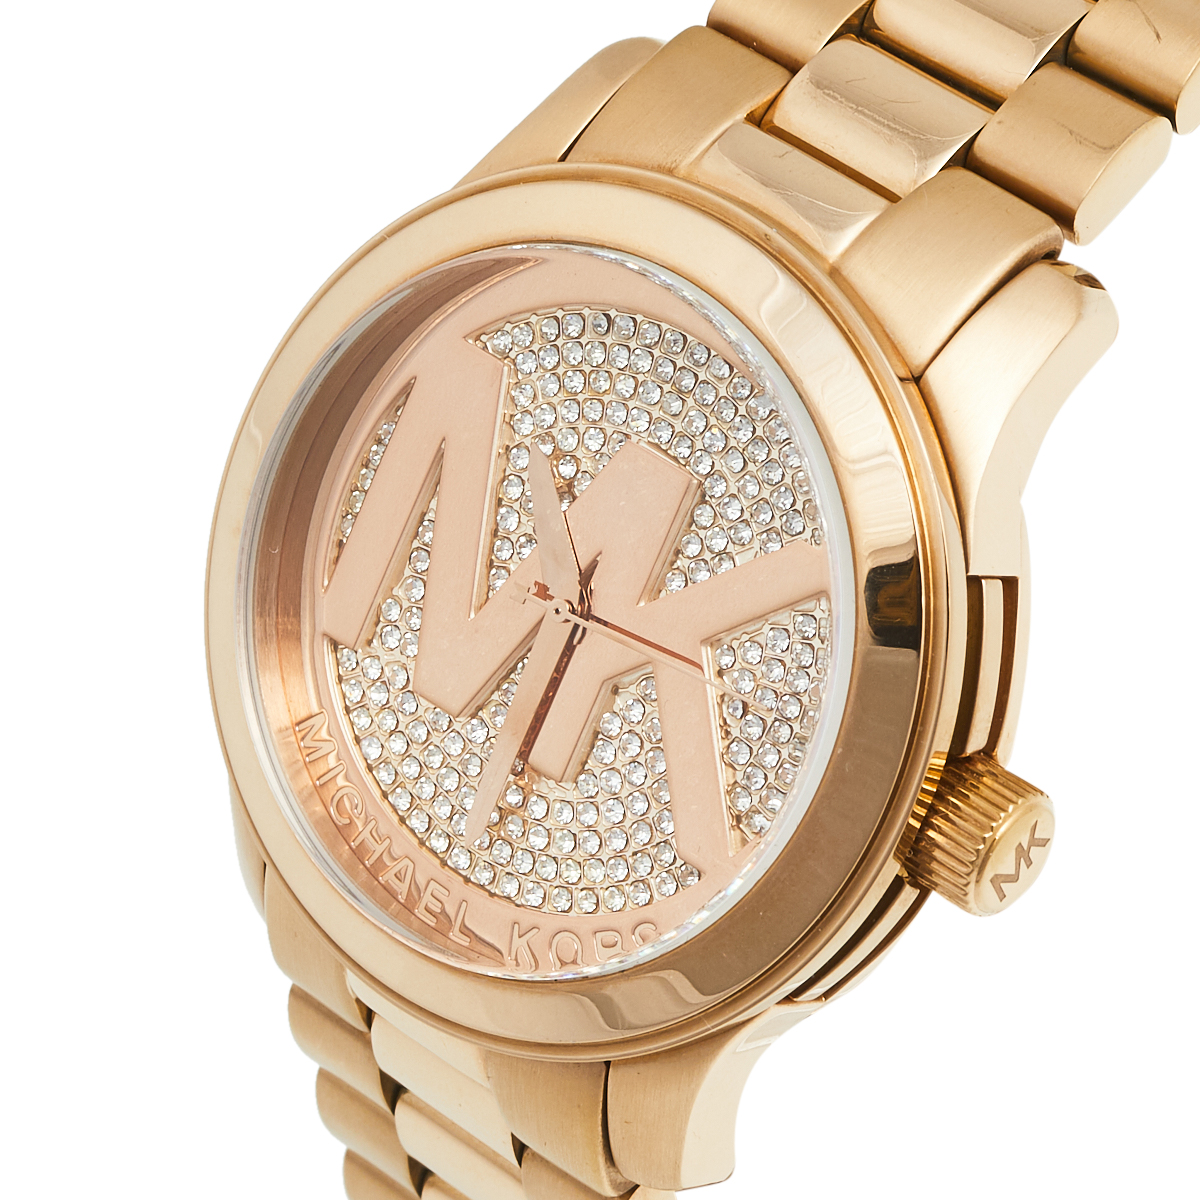 

Michael Kors Champagne Rose Gold Plated Stainless Steel Runway MK-5661 Women's Wristwatch